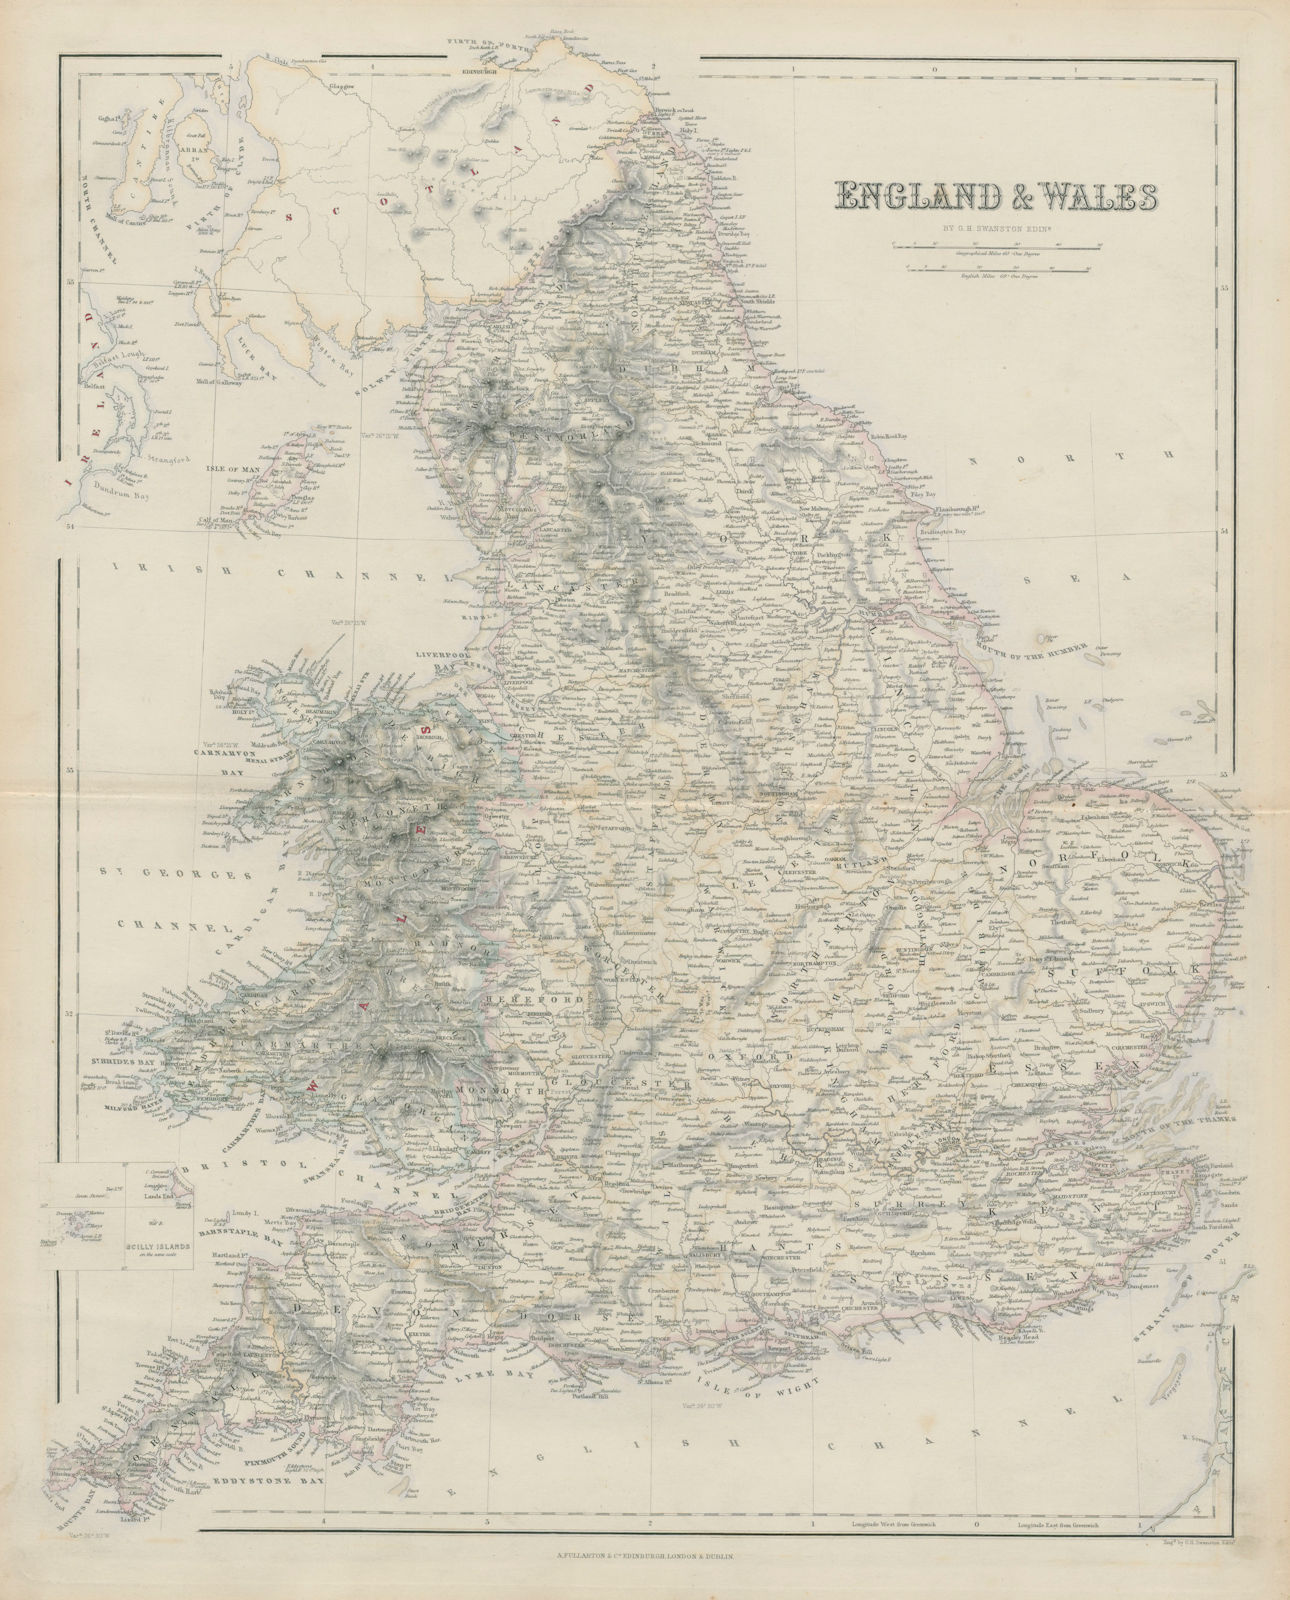 England & Wales. SWANSTON 1860 old antique vintage map plan chart